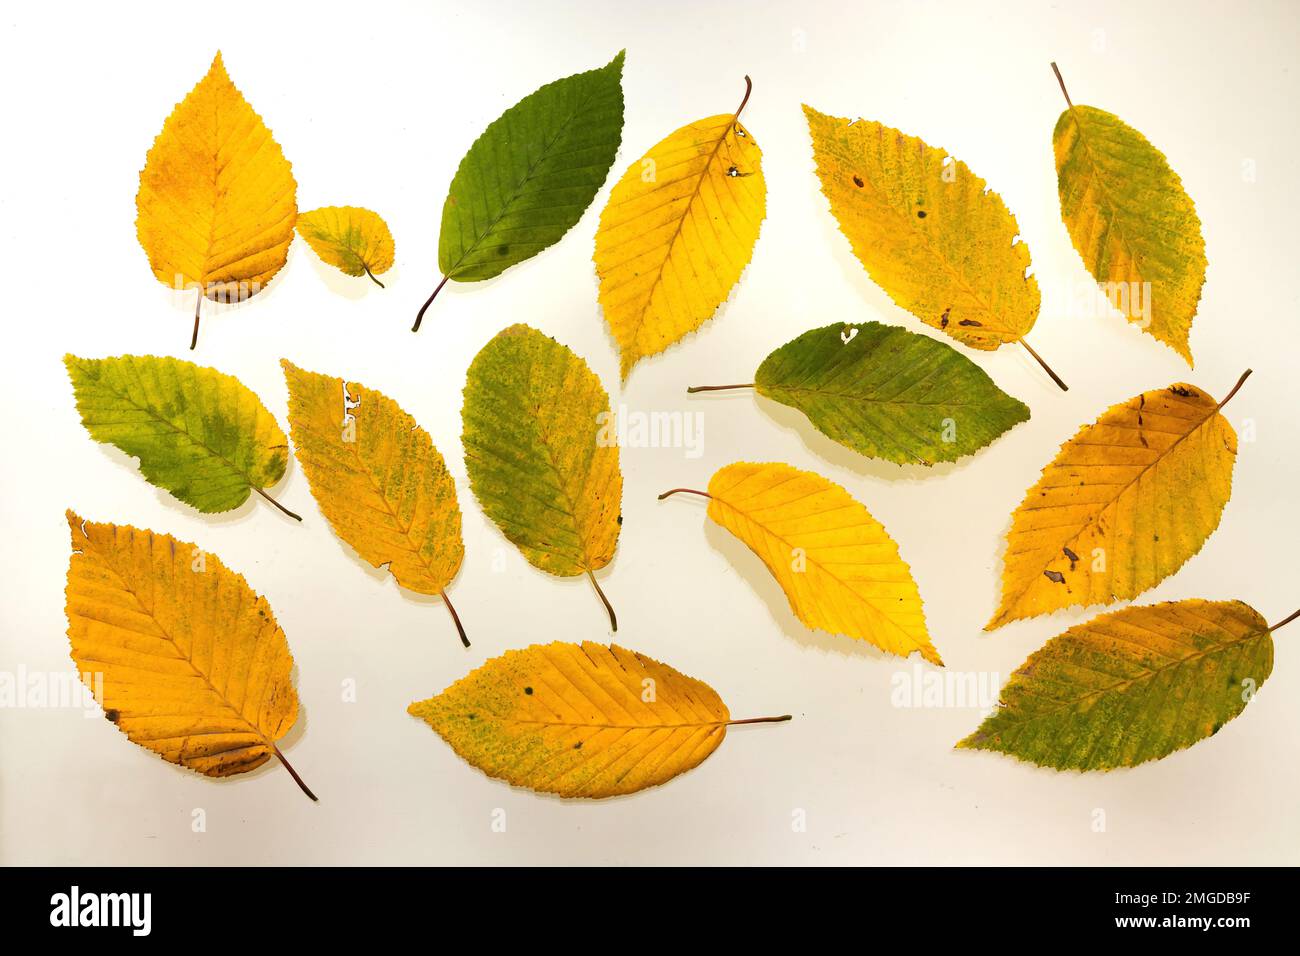 Collection of yellow autumn hornbeam leaves isolated on white background. Stock Photo